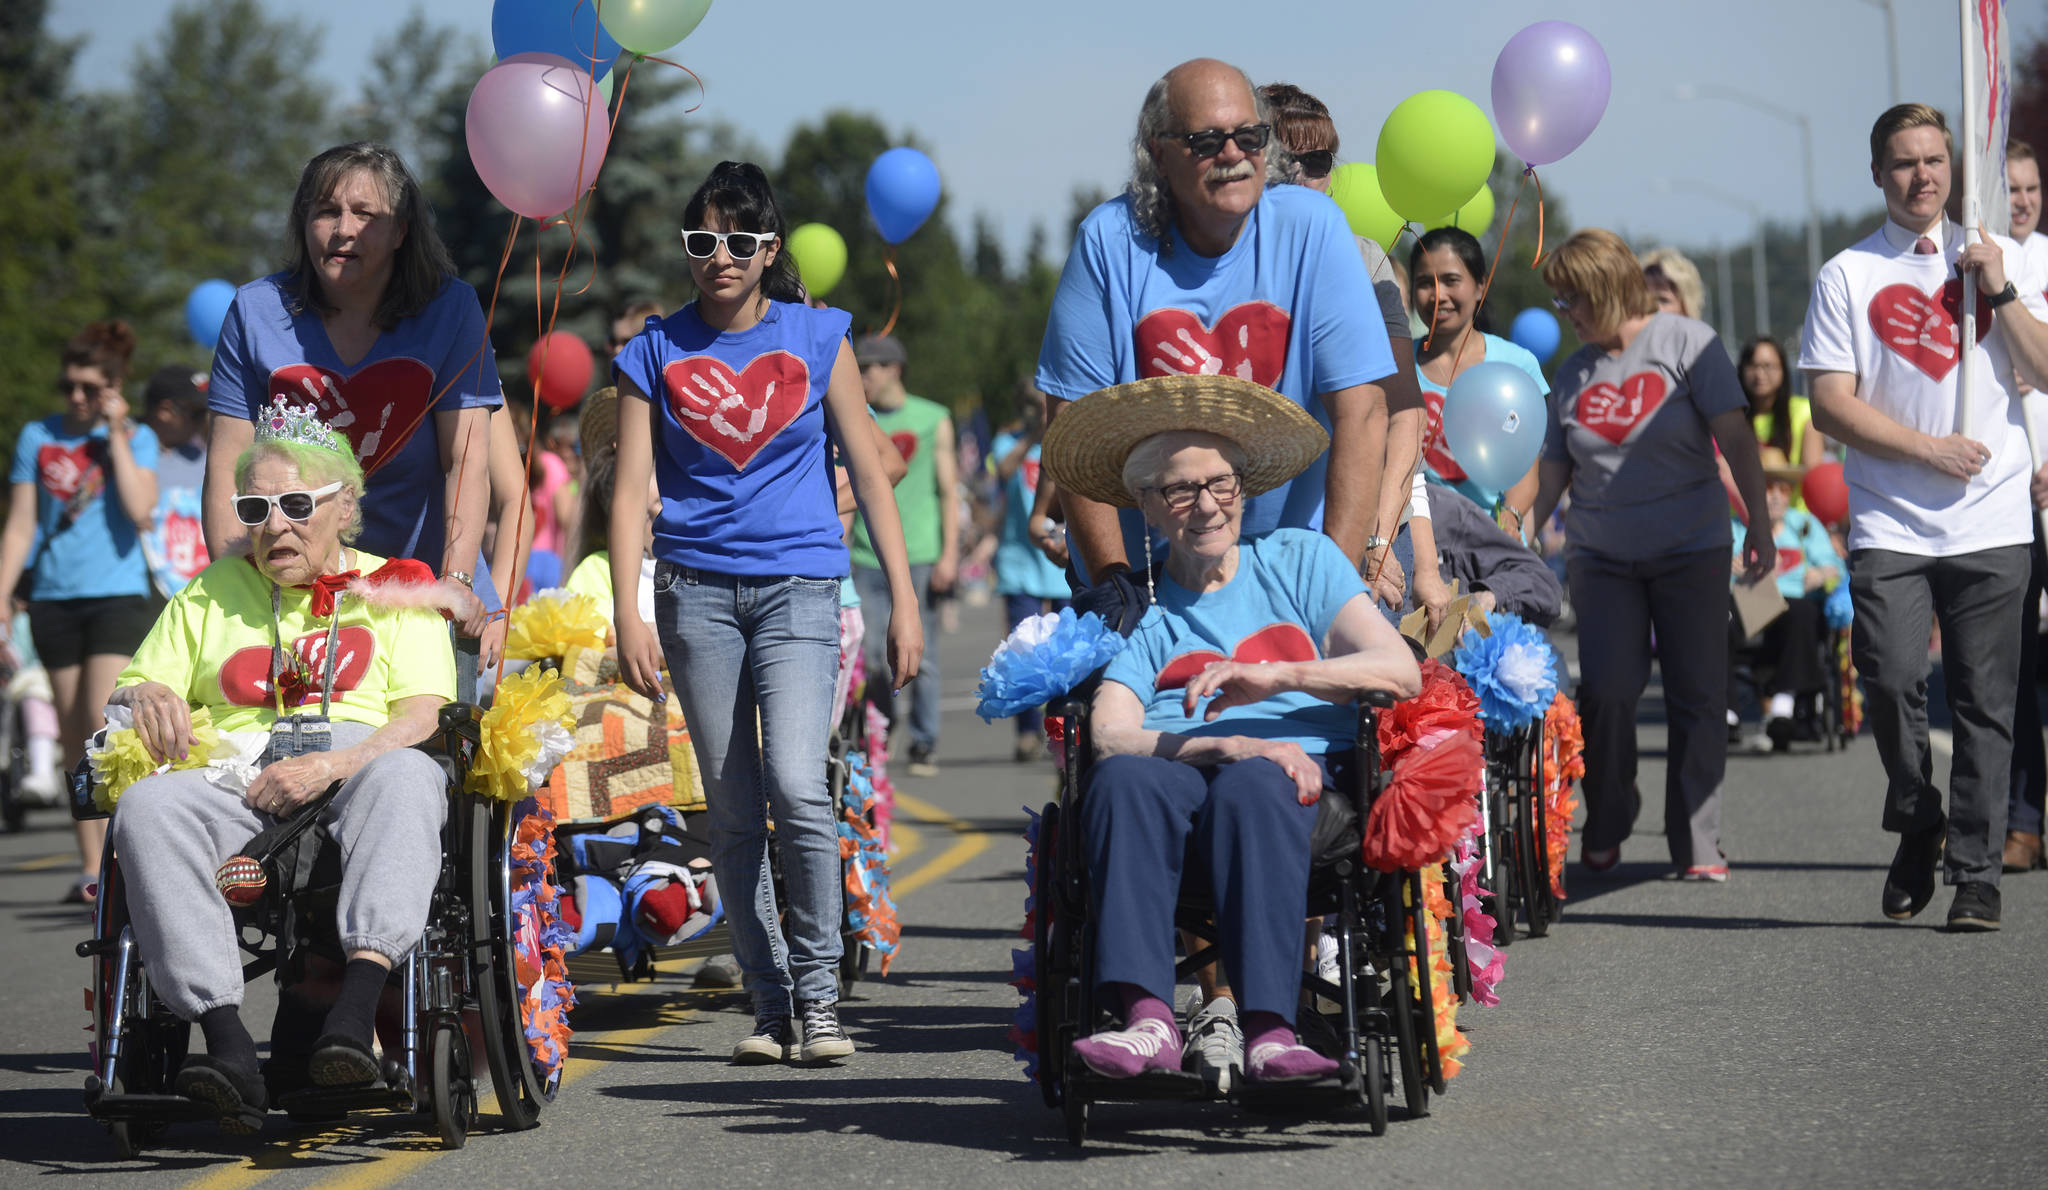 Residents and caretakers of Central Peninsula Hospital’s Heritage Place nursing home participate in Soldotna’s Progress Days Parade on Saturday, July 22, 2017.